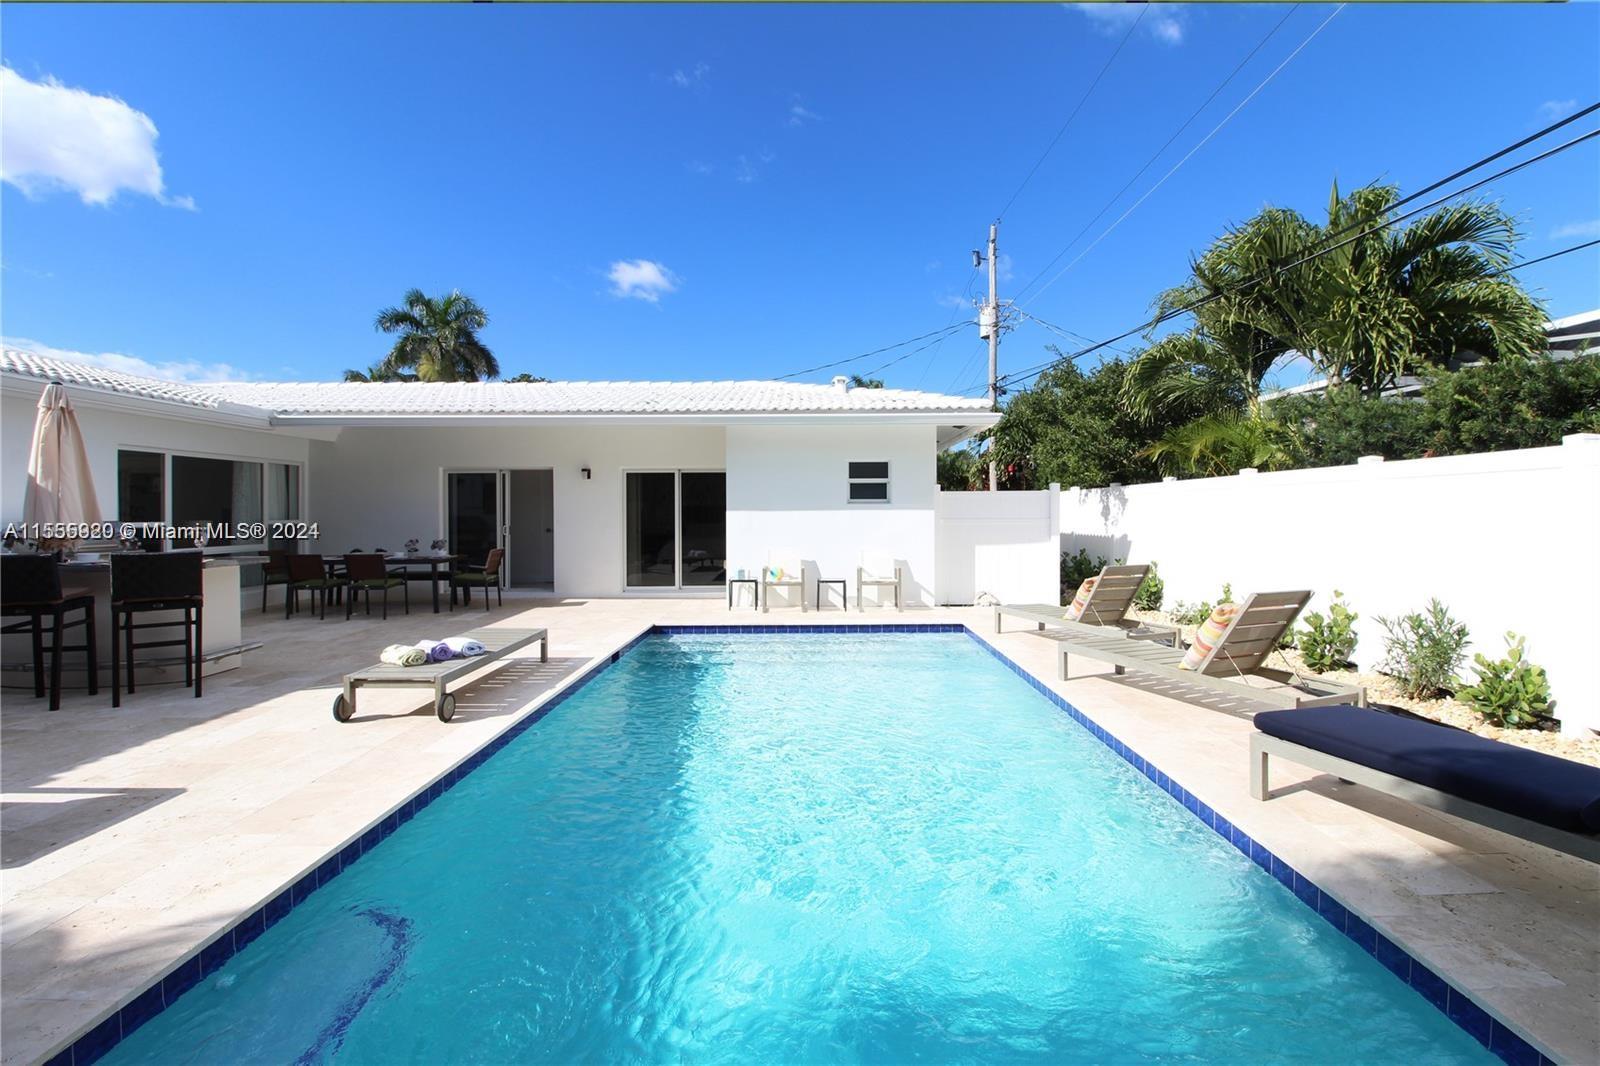 233 Oceanic Ave, Lauderdale By The Sea FL 33308